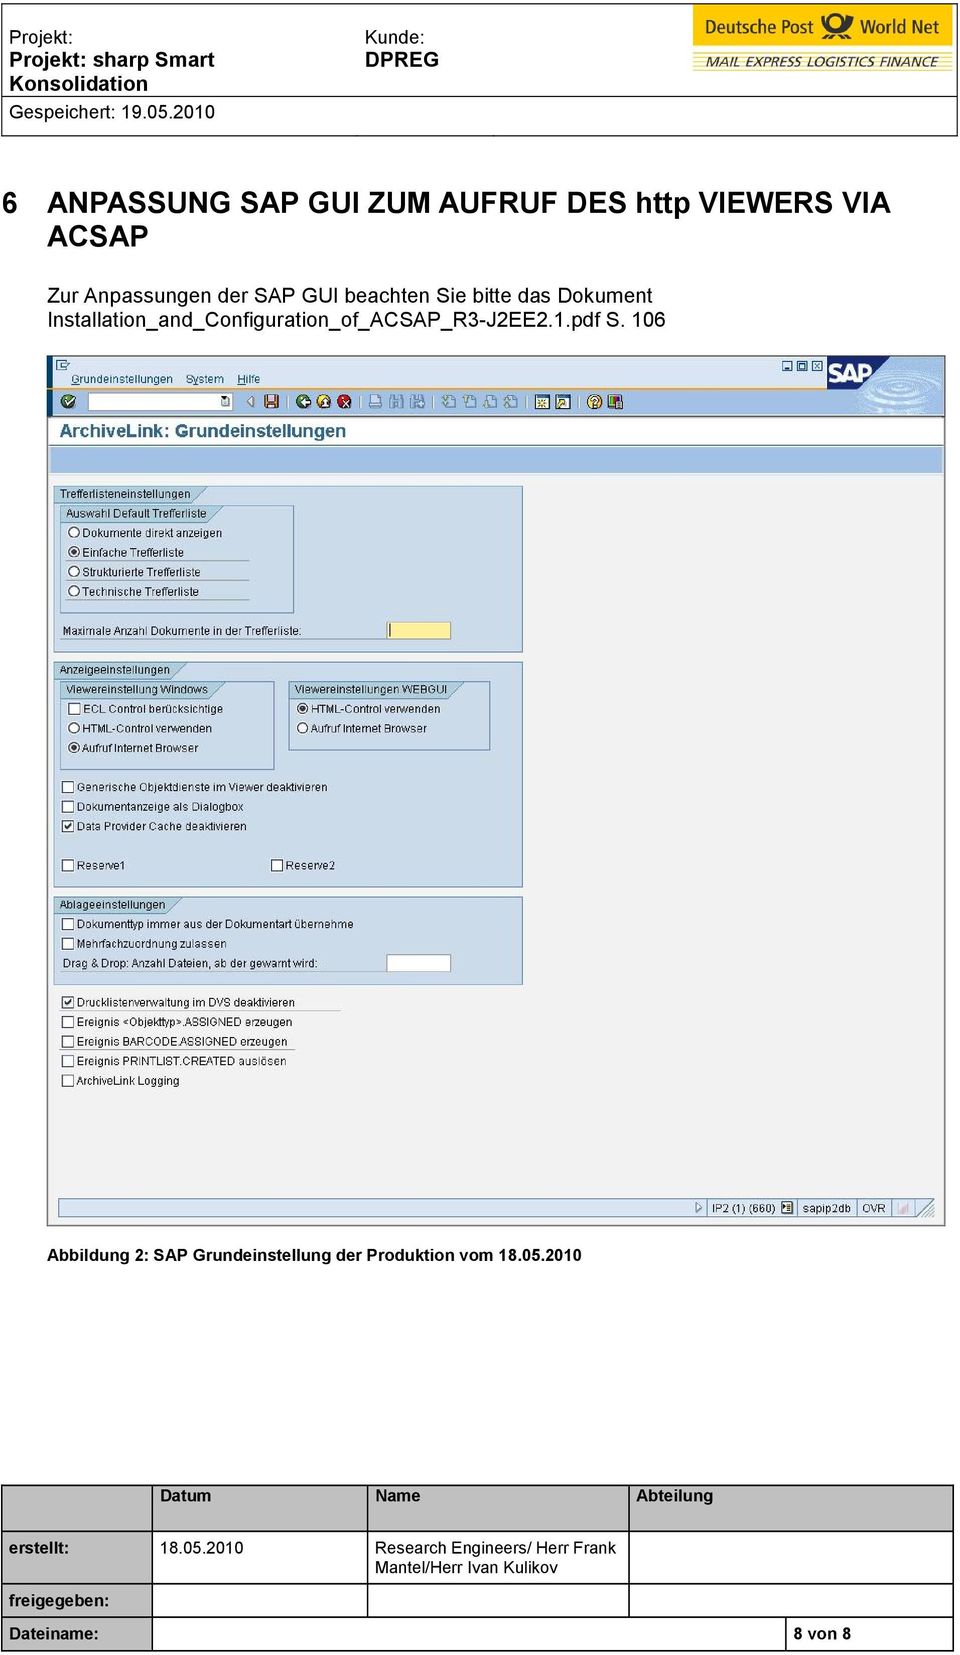 Installation_and_Configuration_of_ACSAP_R3-J2EE2.1.pdf S.